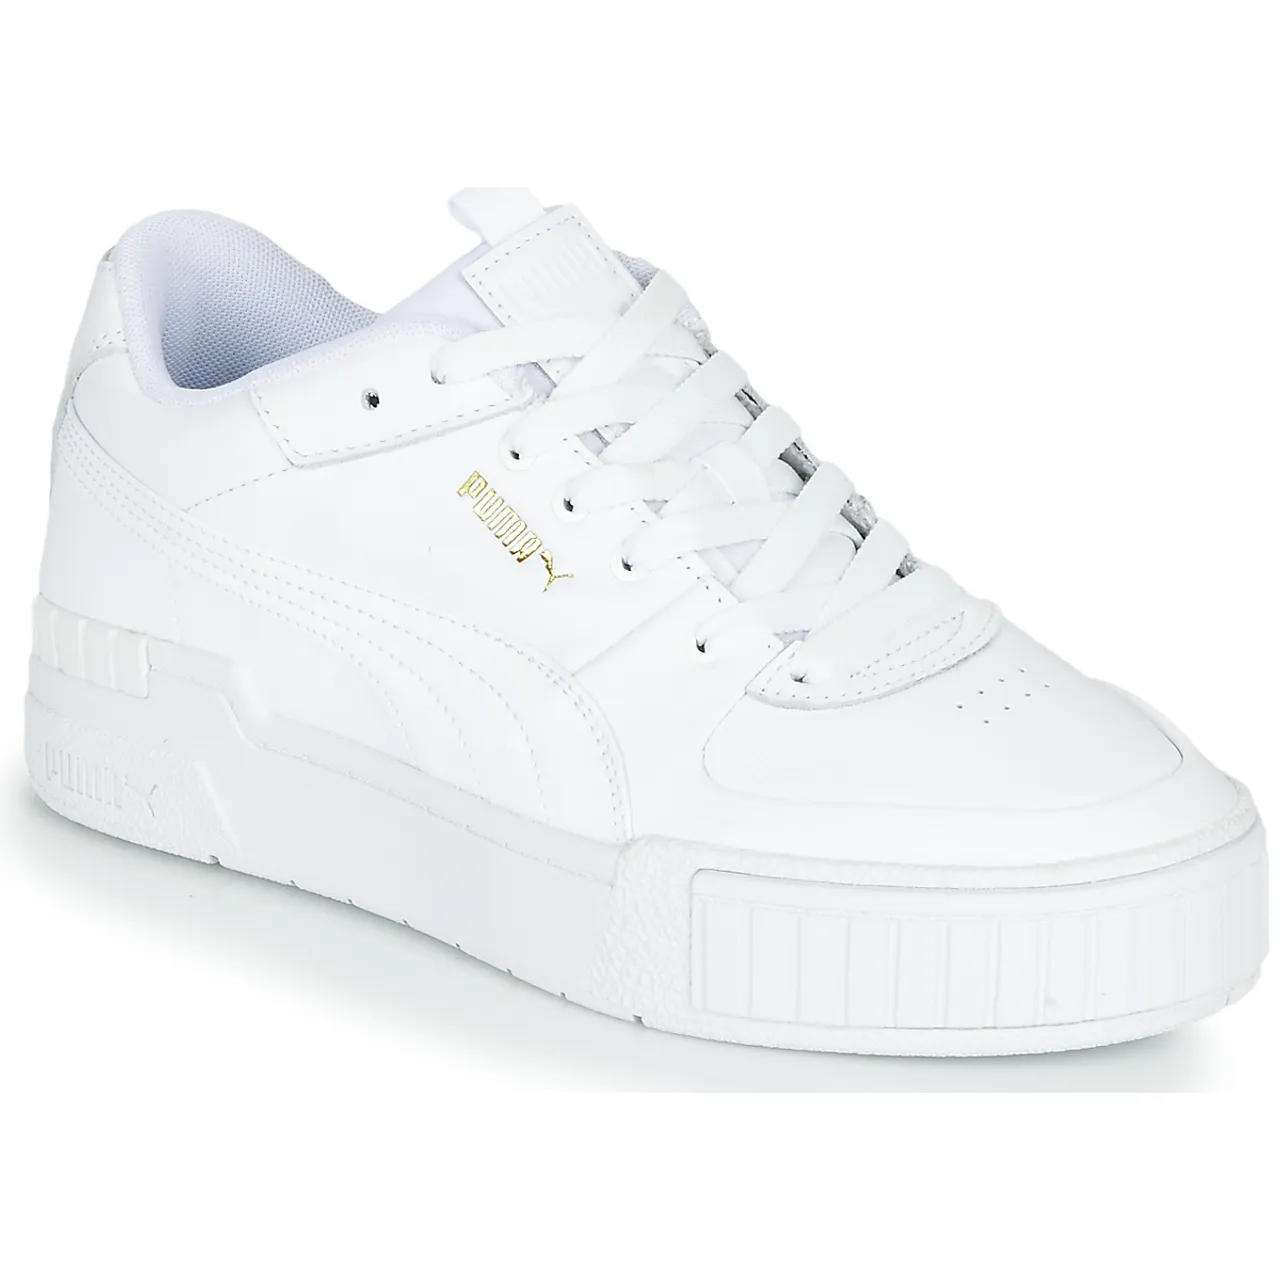 Puma  CALI SPORT  women's Shoes (Trainers) in White